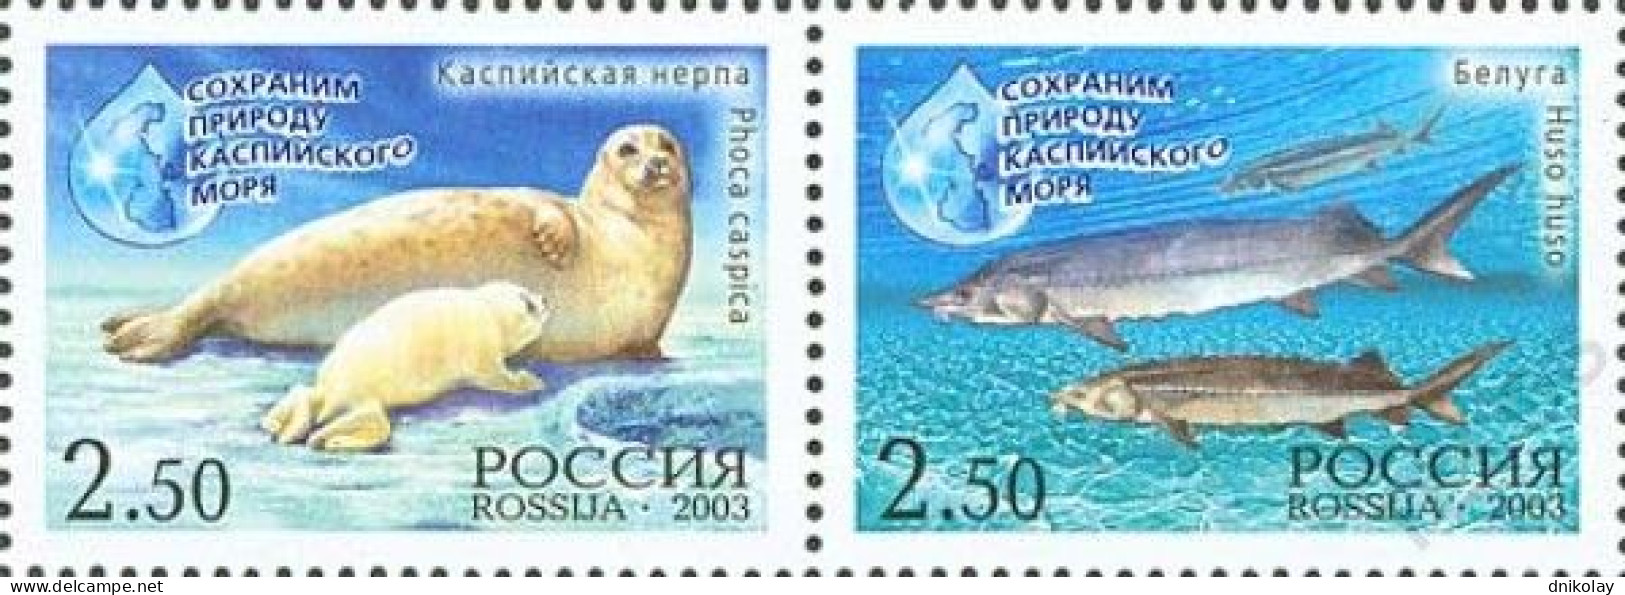 2003 1112 Russia Fauna - Russian-Iranian Joint Issue MNH - Nuevos